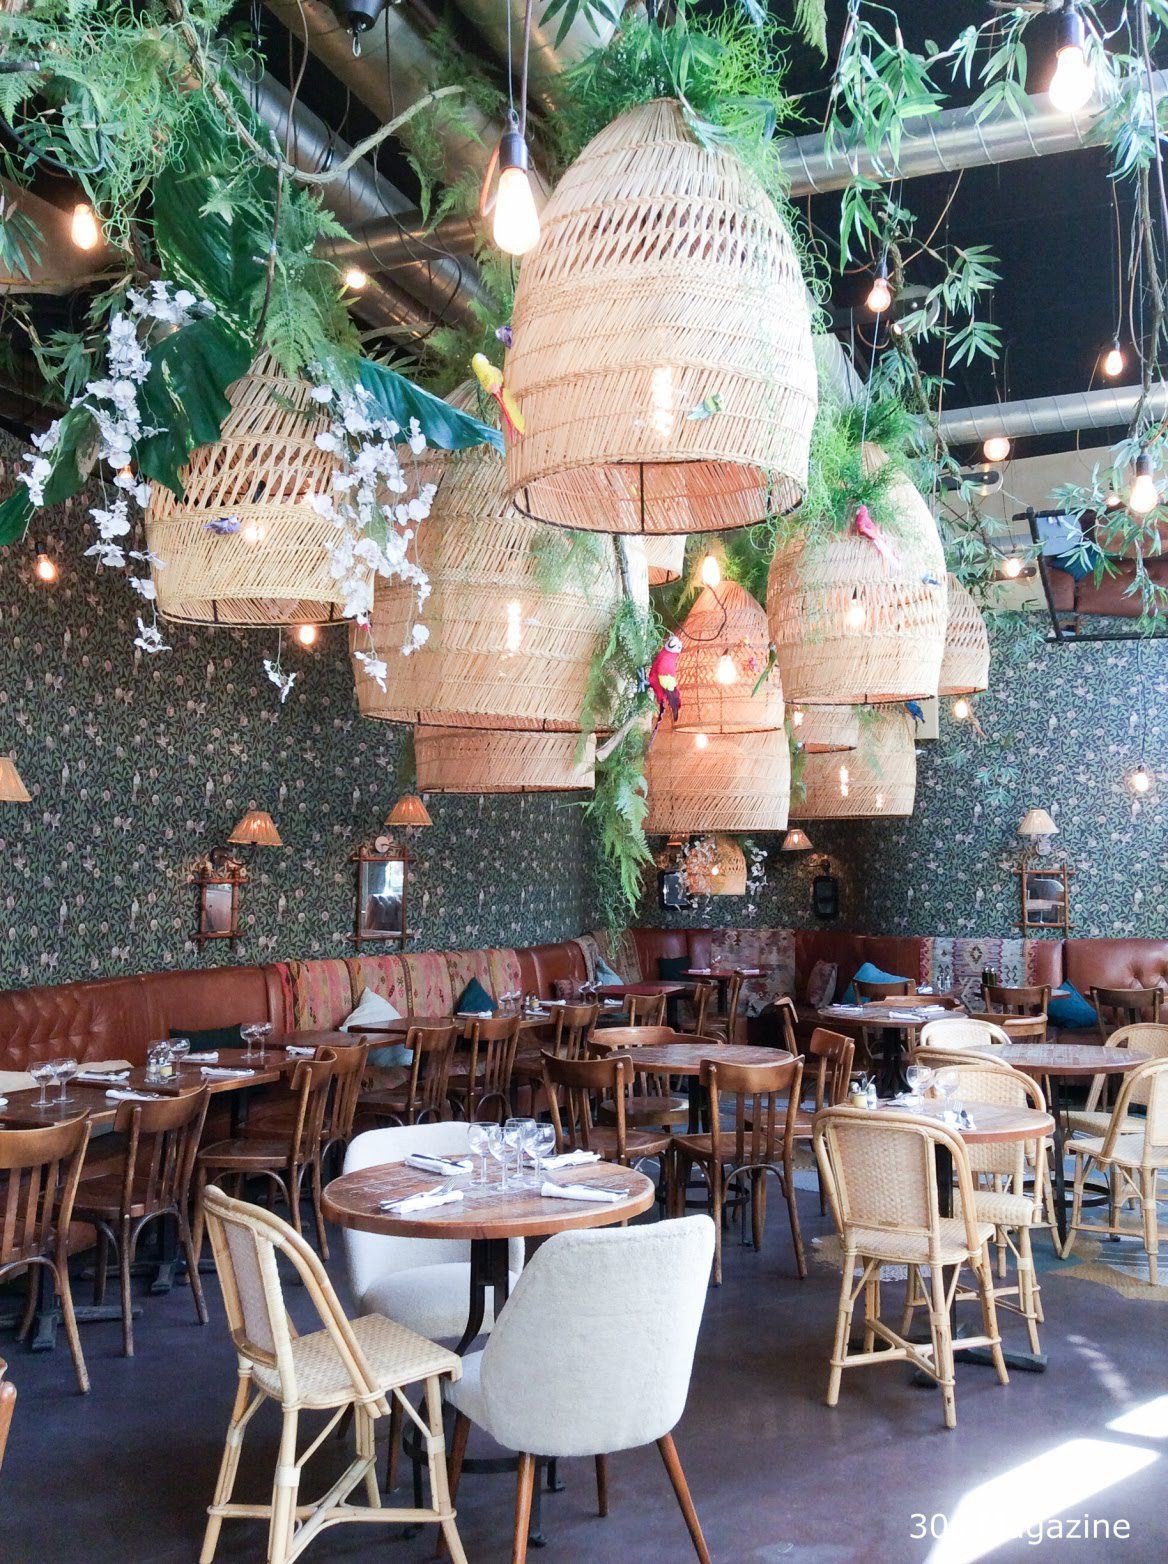 How to design cafe like Le Brebant Paris with rattan pendant lights